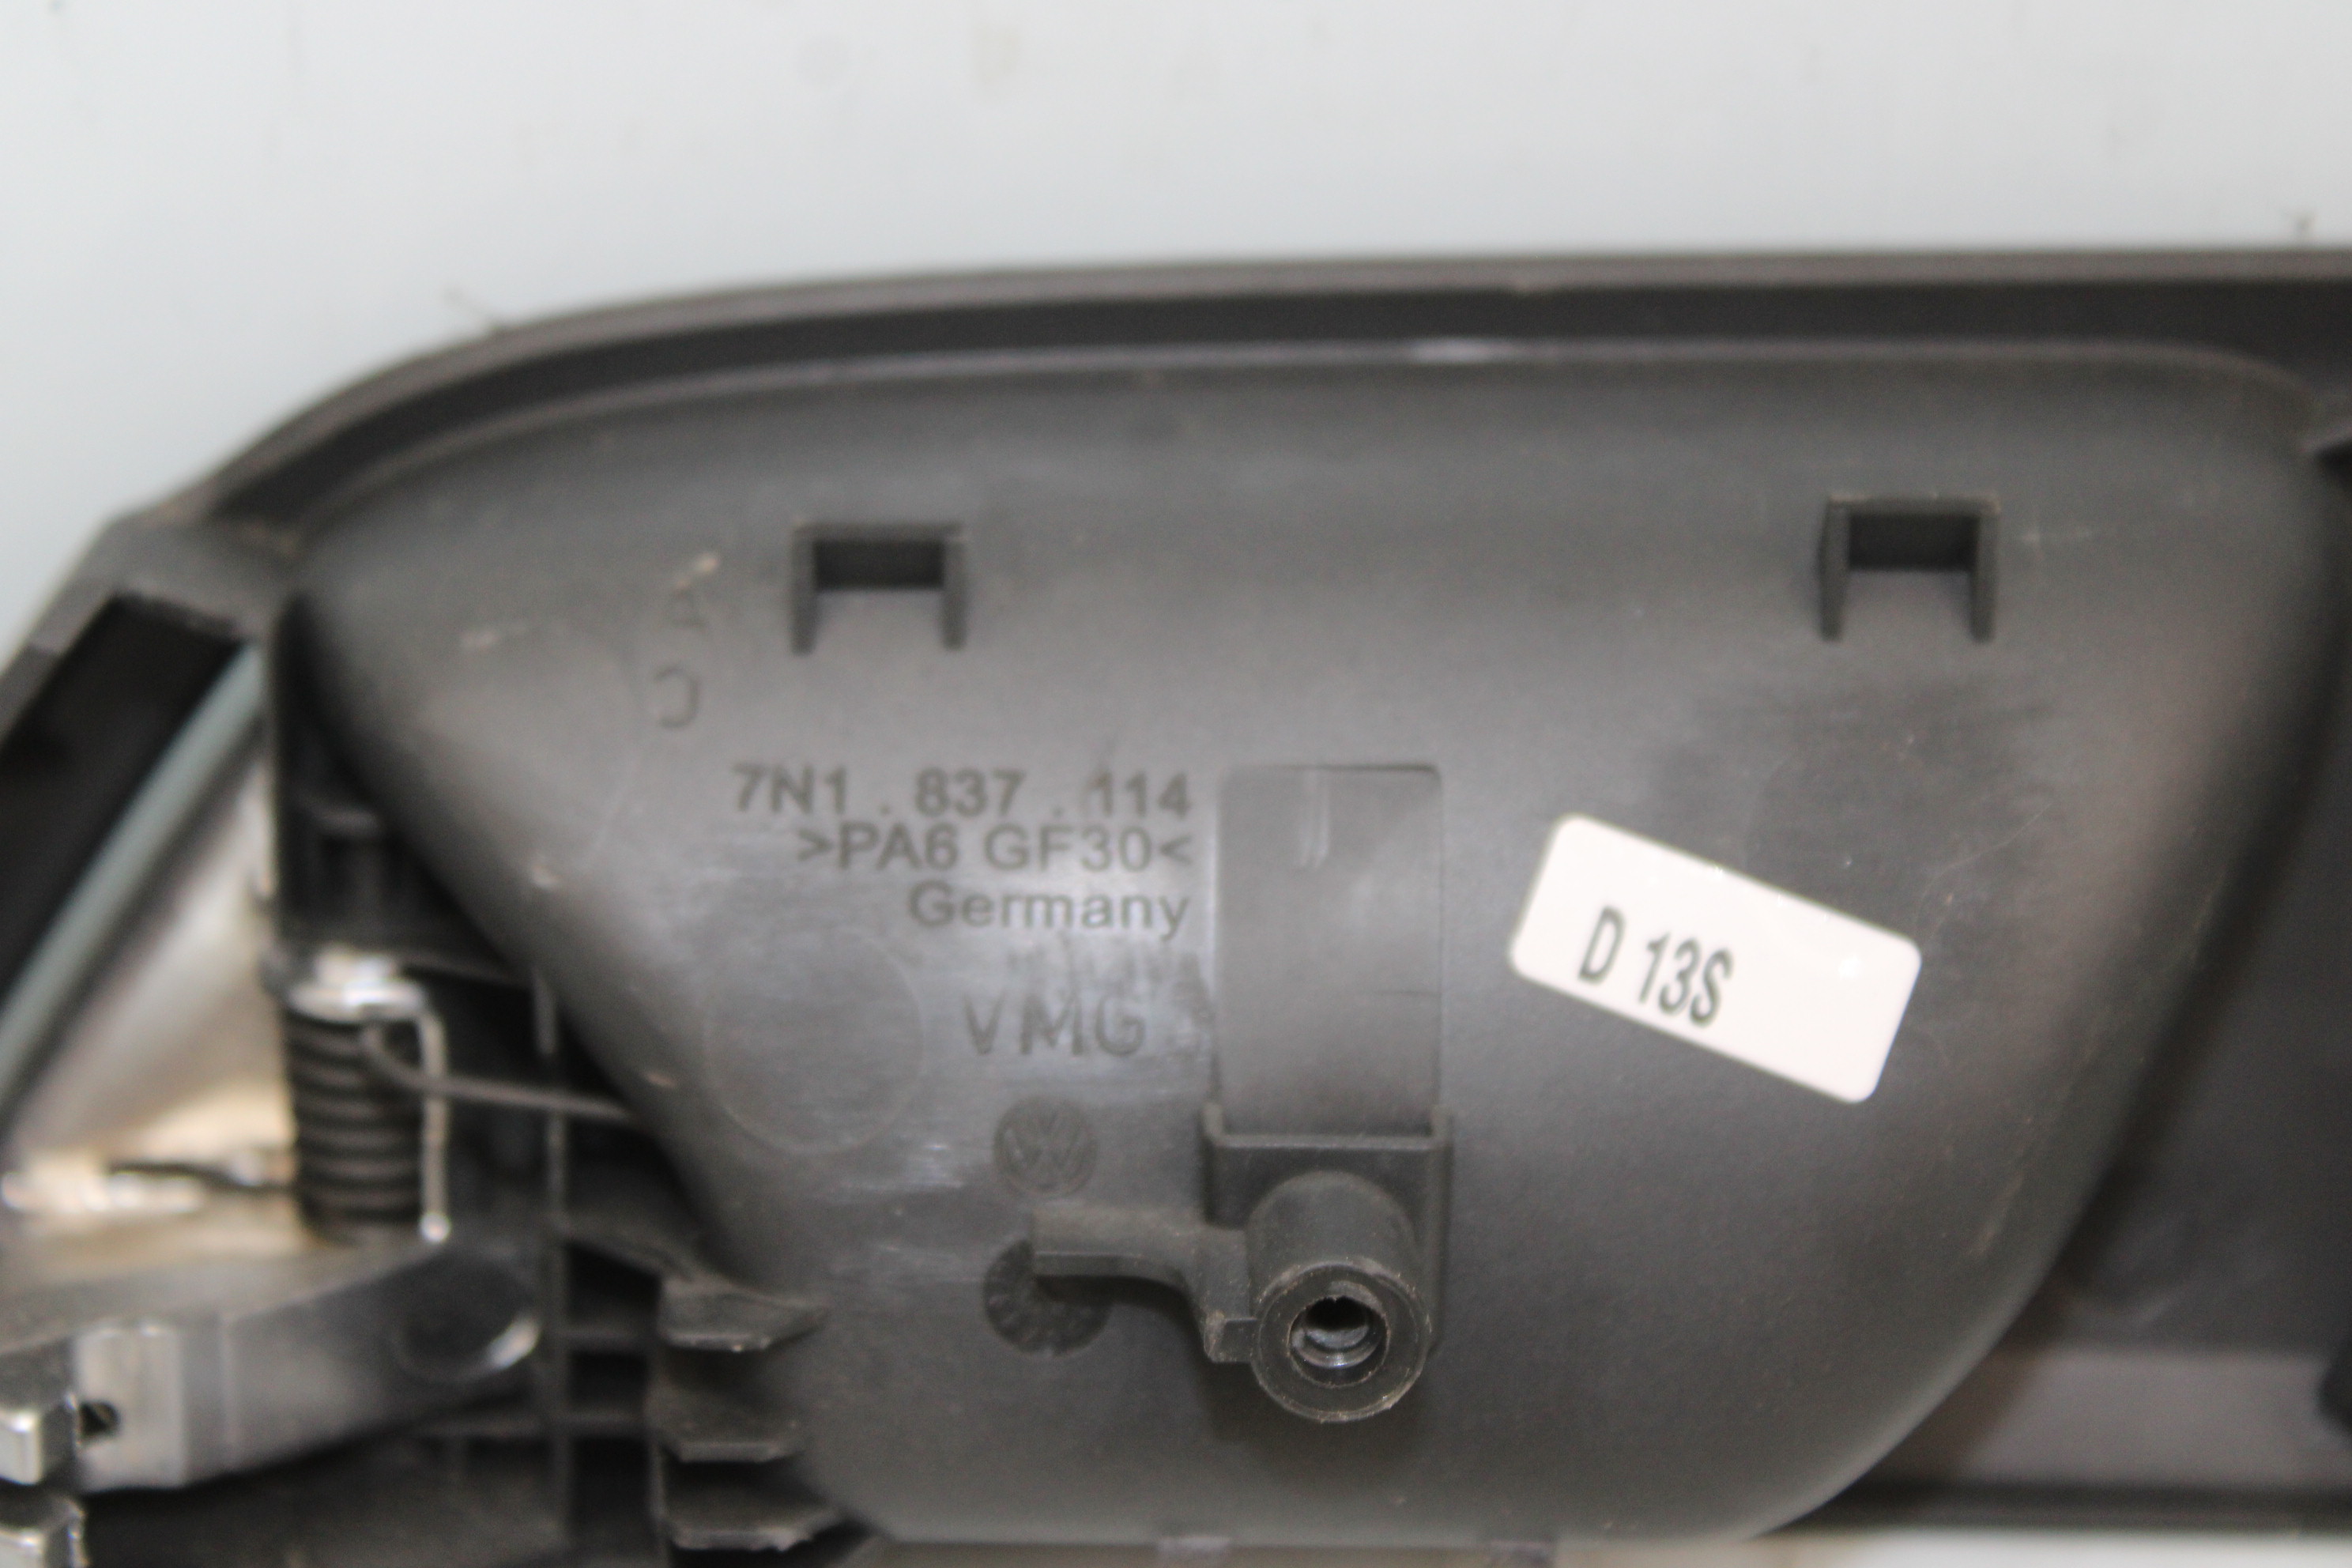 SEAT Alhambra 2 generation (2010-2021) Other Interior Parts 7N1837114 25196465